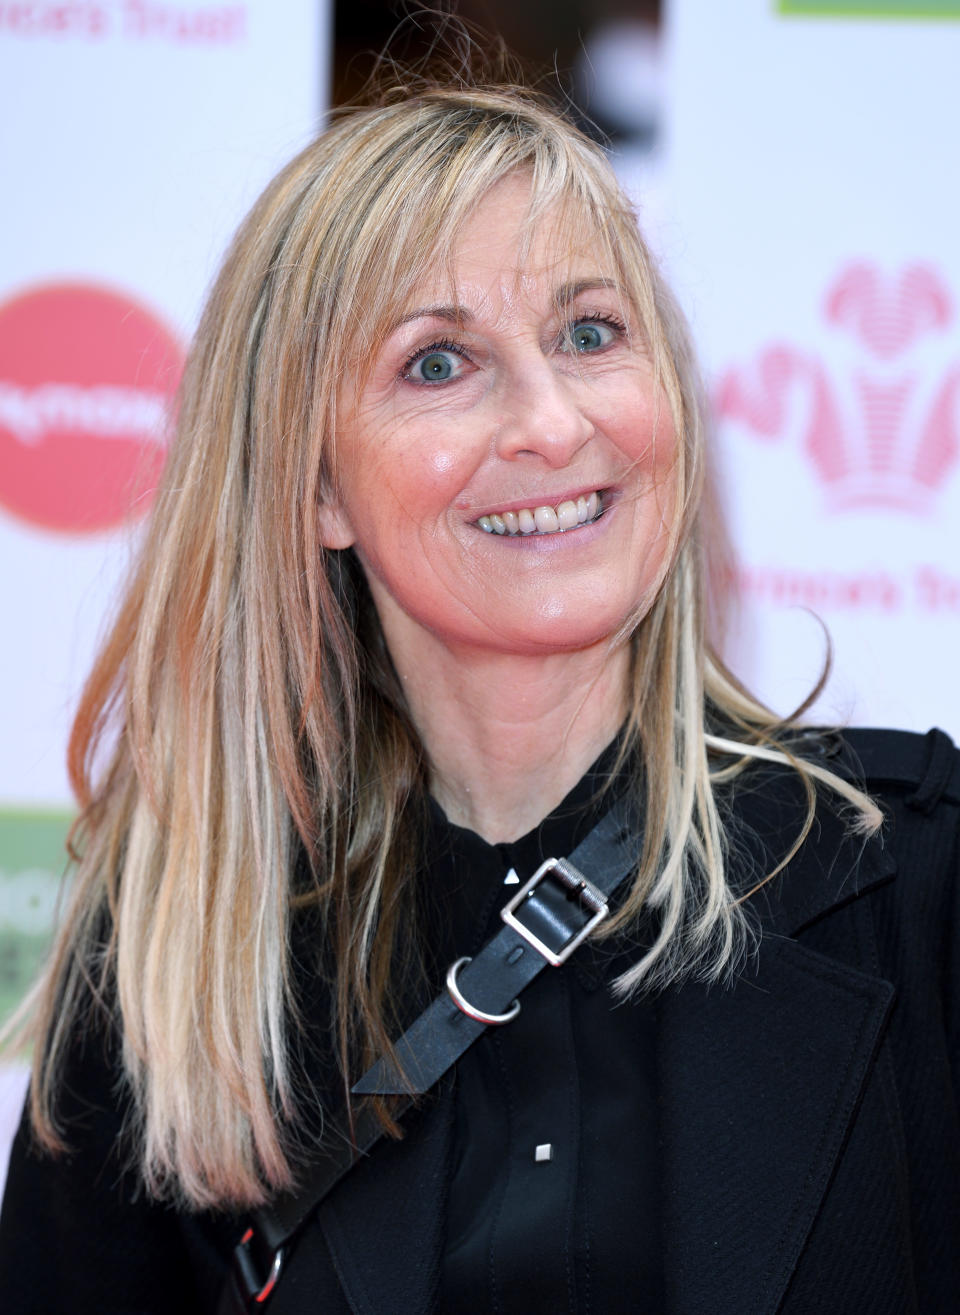 Fiona Phillips, pictured, has revealed her dementia diagnosis. (Getty Images)